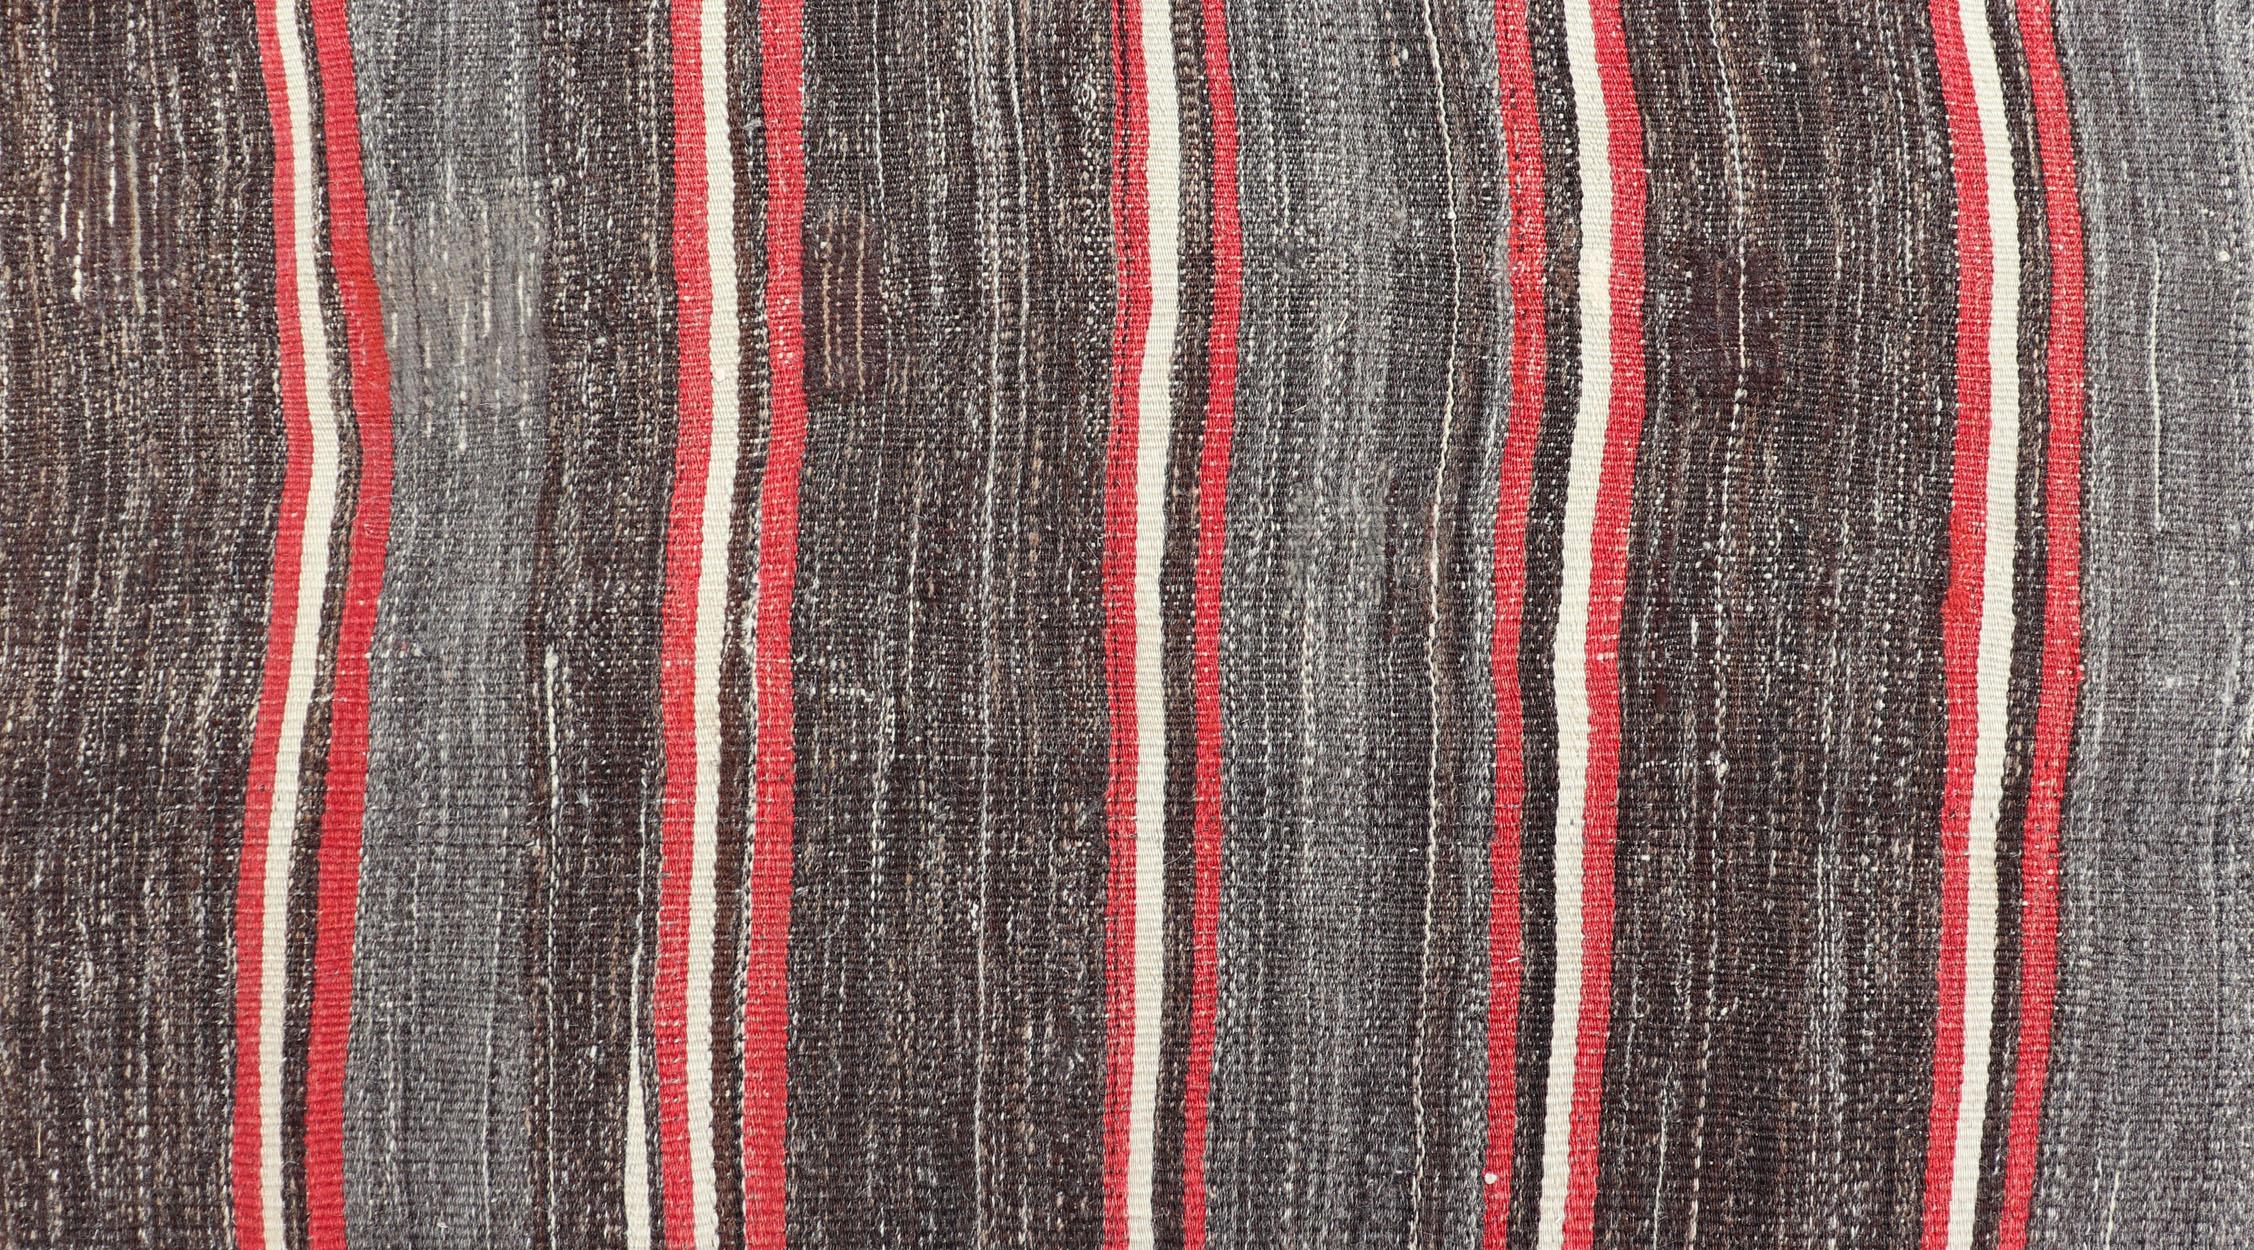 Vintage Turkish Kilim Wide Runner in Gray, Coral, Brown & Charcoal with Stripes 5